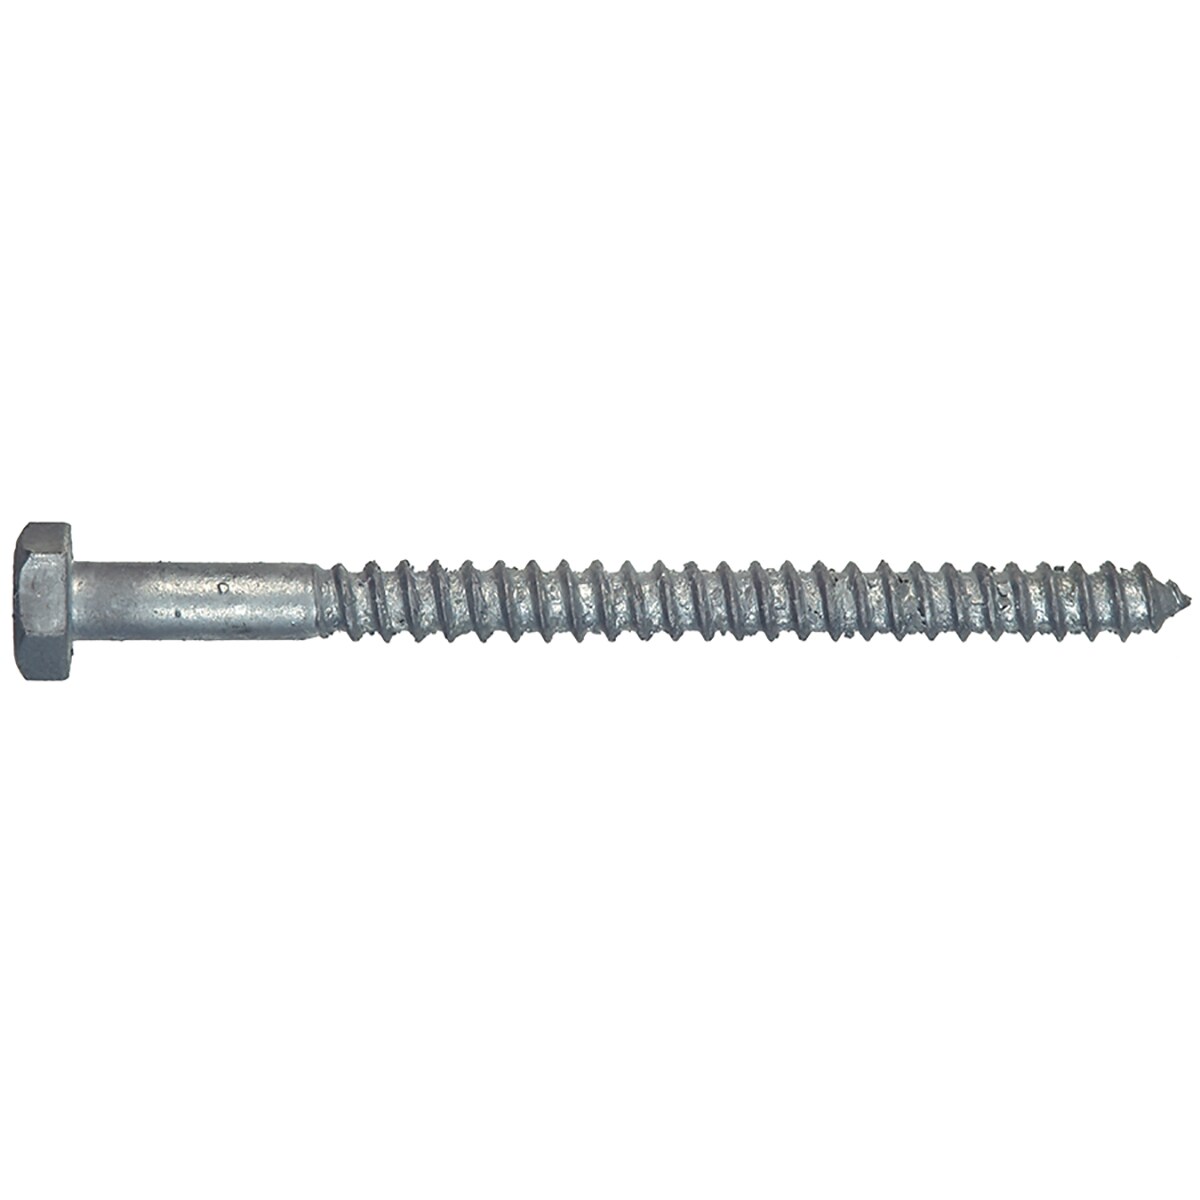 Select Length 3/8"-7 Hex Lag Screws Zinc Plated Steel Hex Head Lag Bolts 